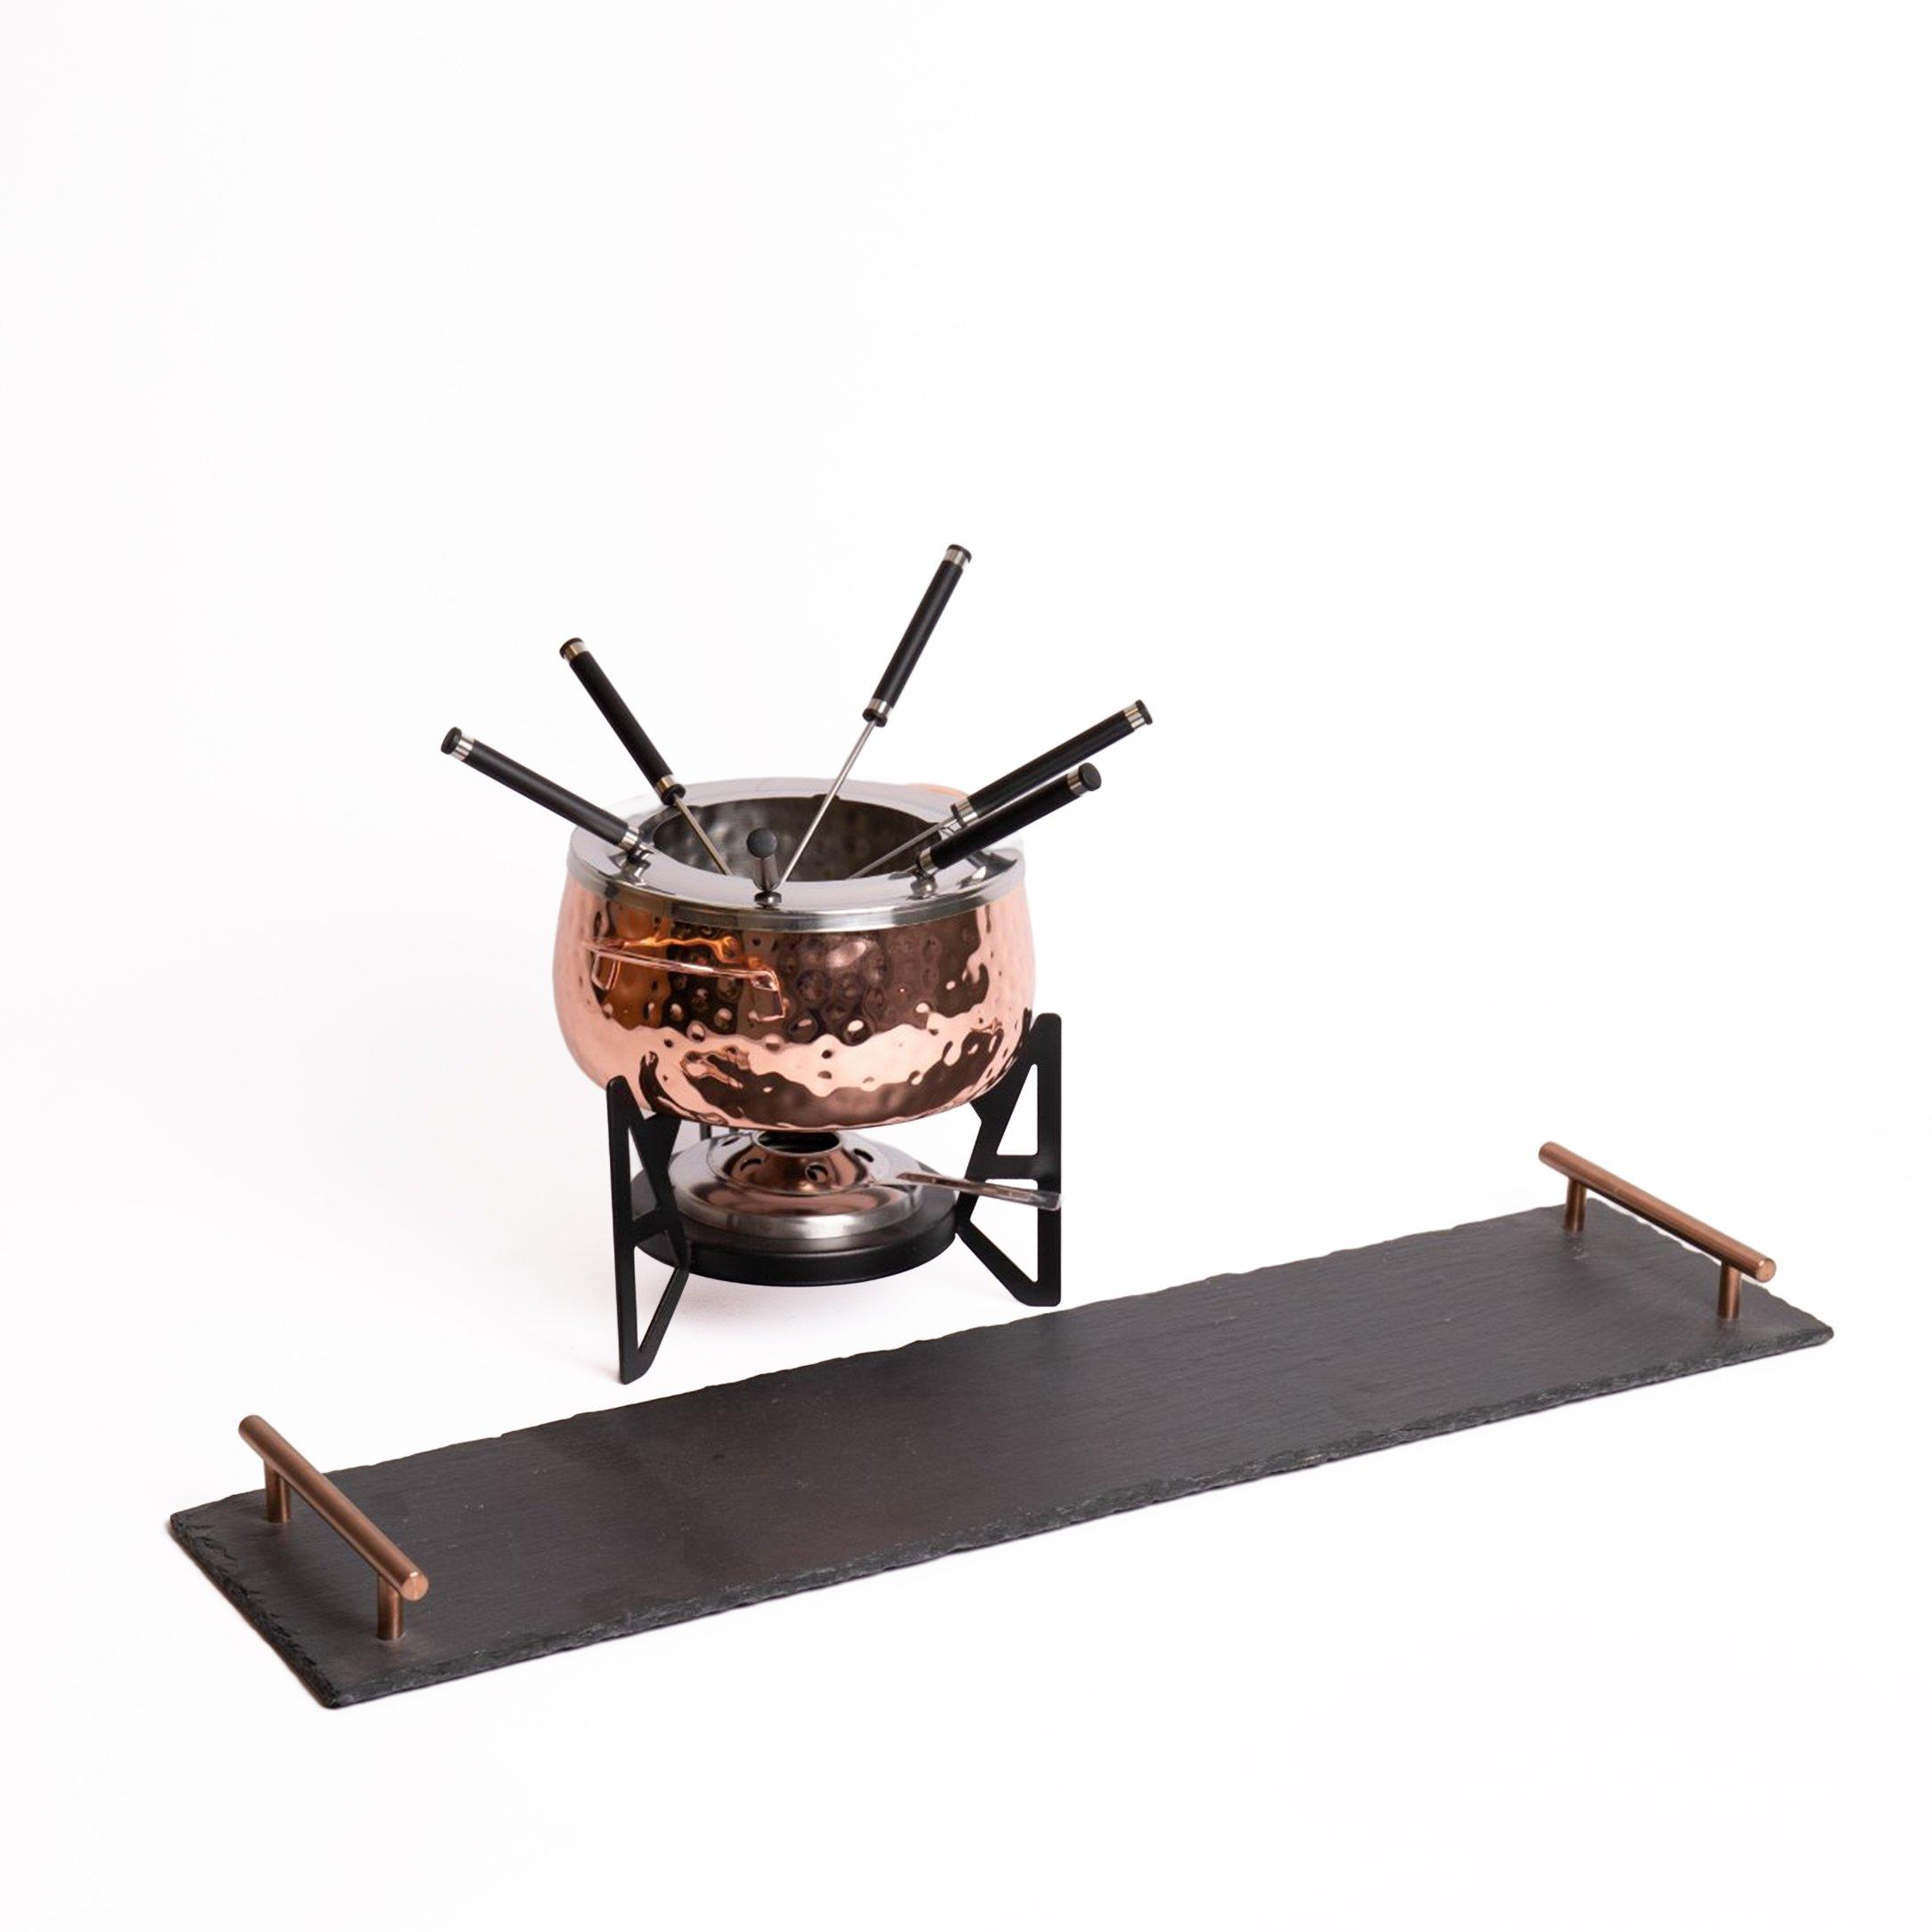 Fondue Set, including Copper Fondue Pot with 5x Forks and Slate Serving Platter with Copper Handles